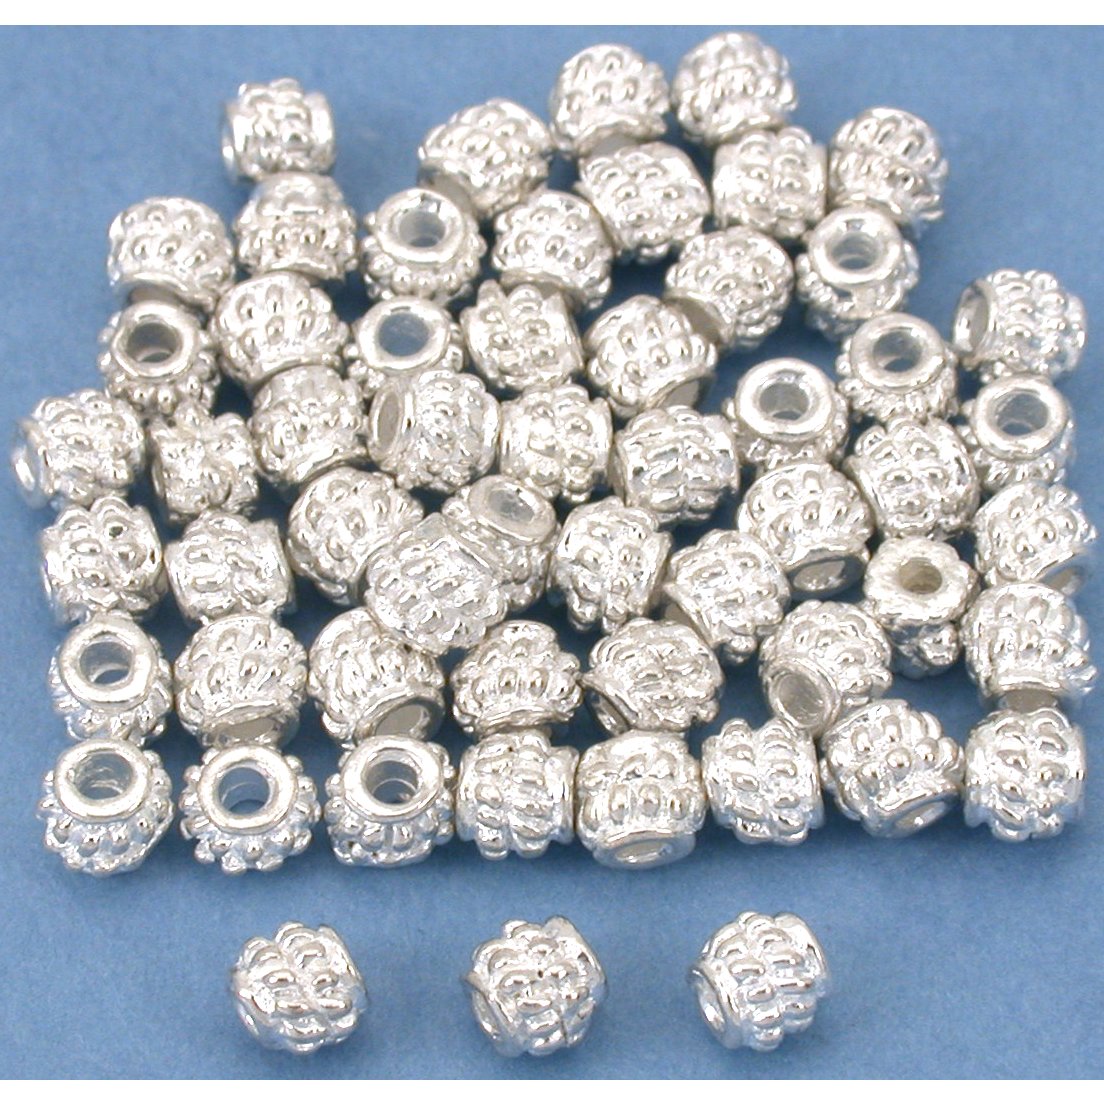 Bali Spacer Rope Beads Silver Plated 4mm 55Pcs Approx.